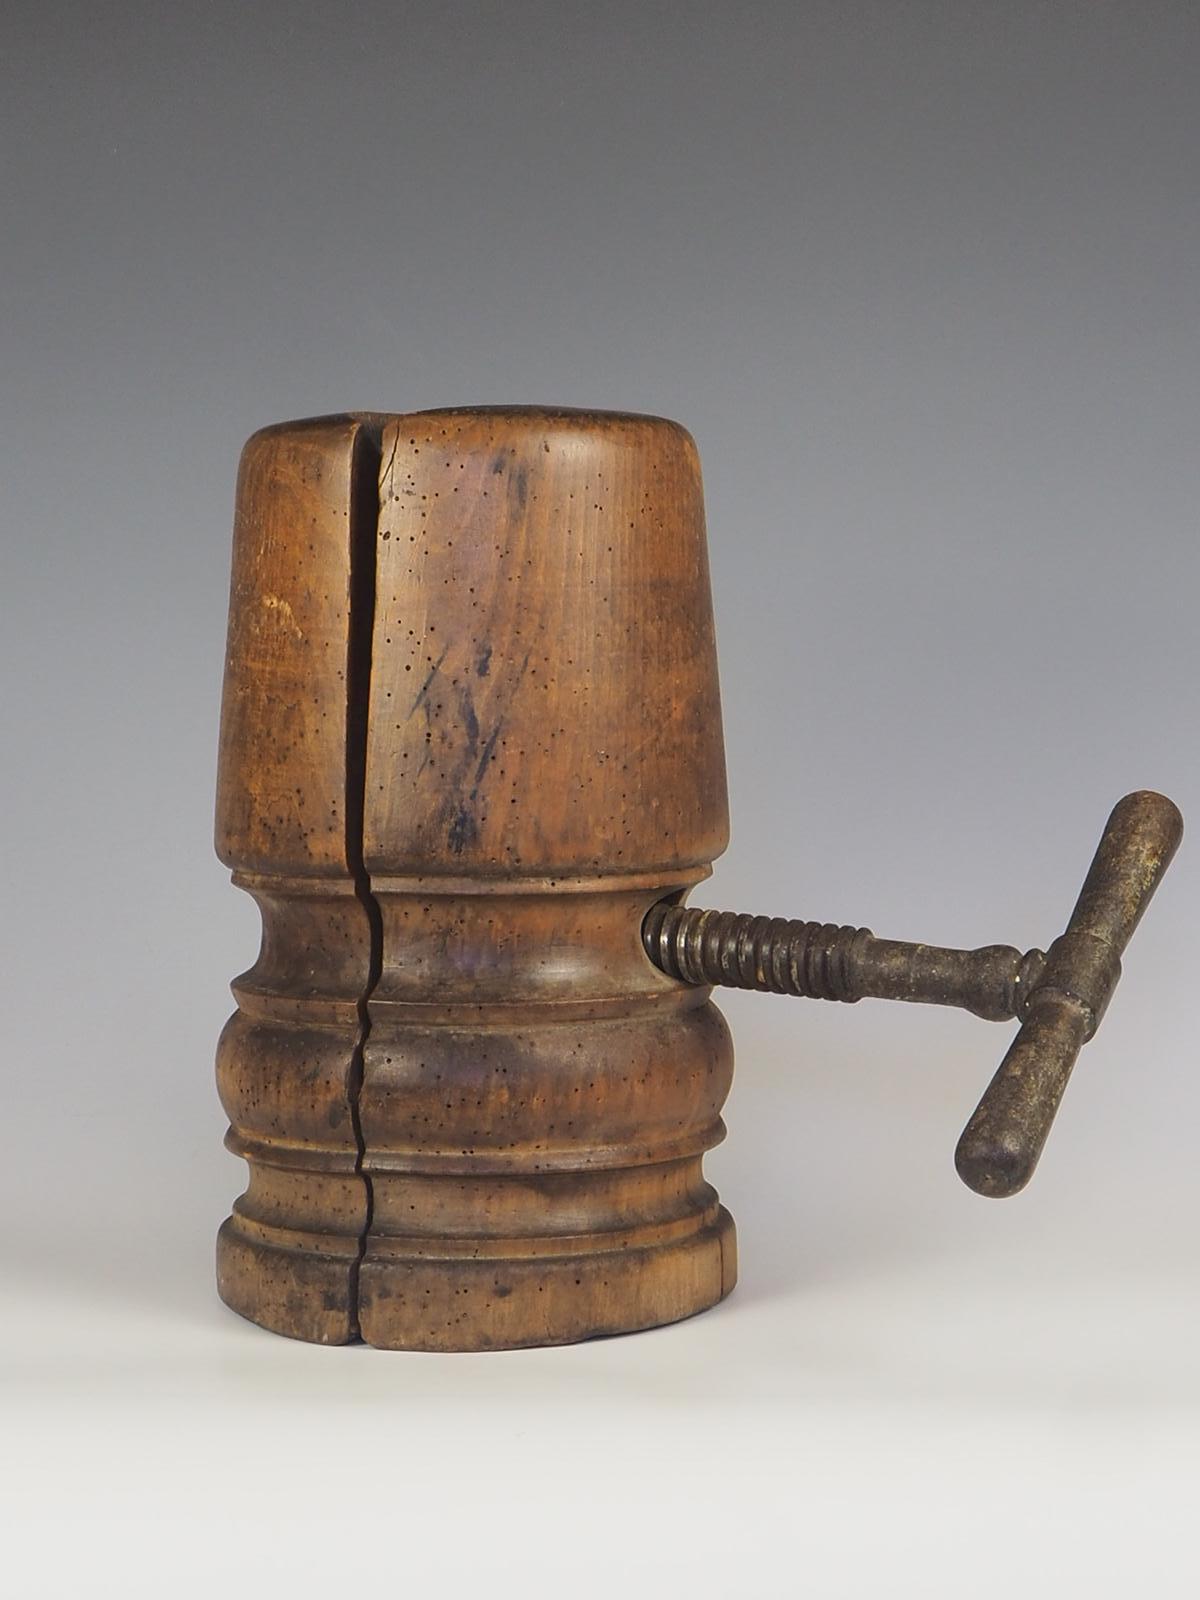 Mid to late 19th century adjustable milliners hat stretcher/block.

A wonderful & early piece made from a single lump of hardwood with a fantastic grain & depth of colour. An exceptional example, finished with some beautiful metalwork & a patinated